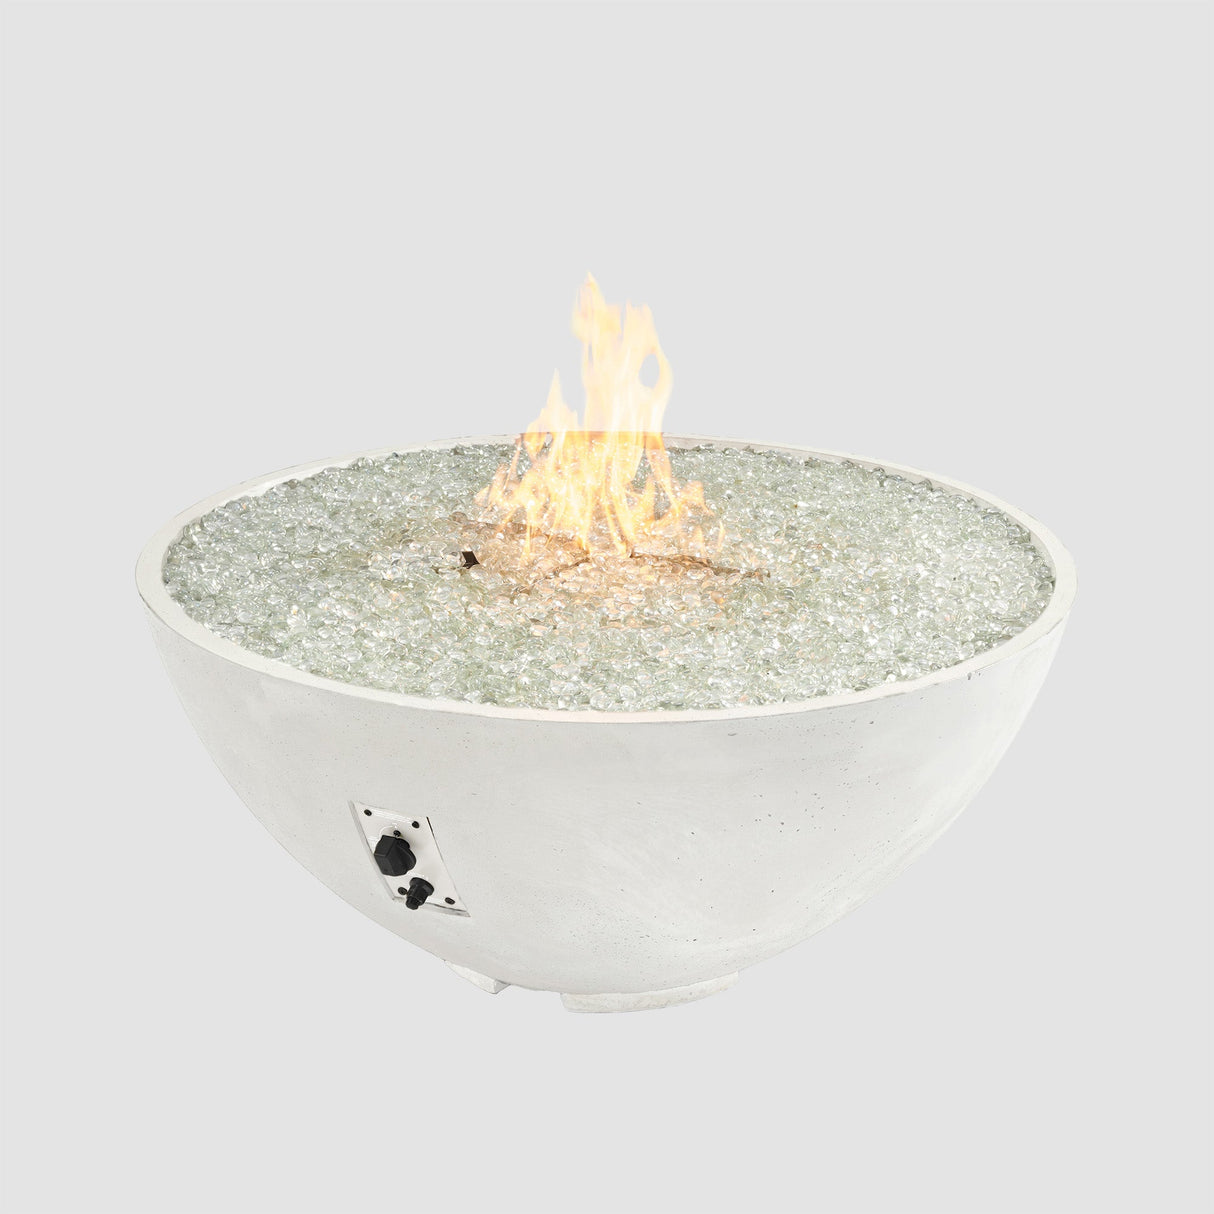 White Cove Edge Round Gas Fire Pit Bowl 42" on a grey background